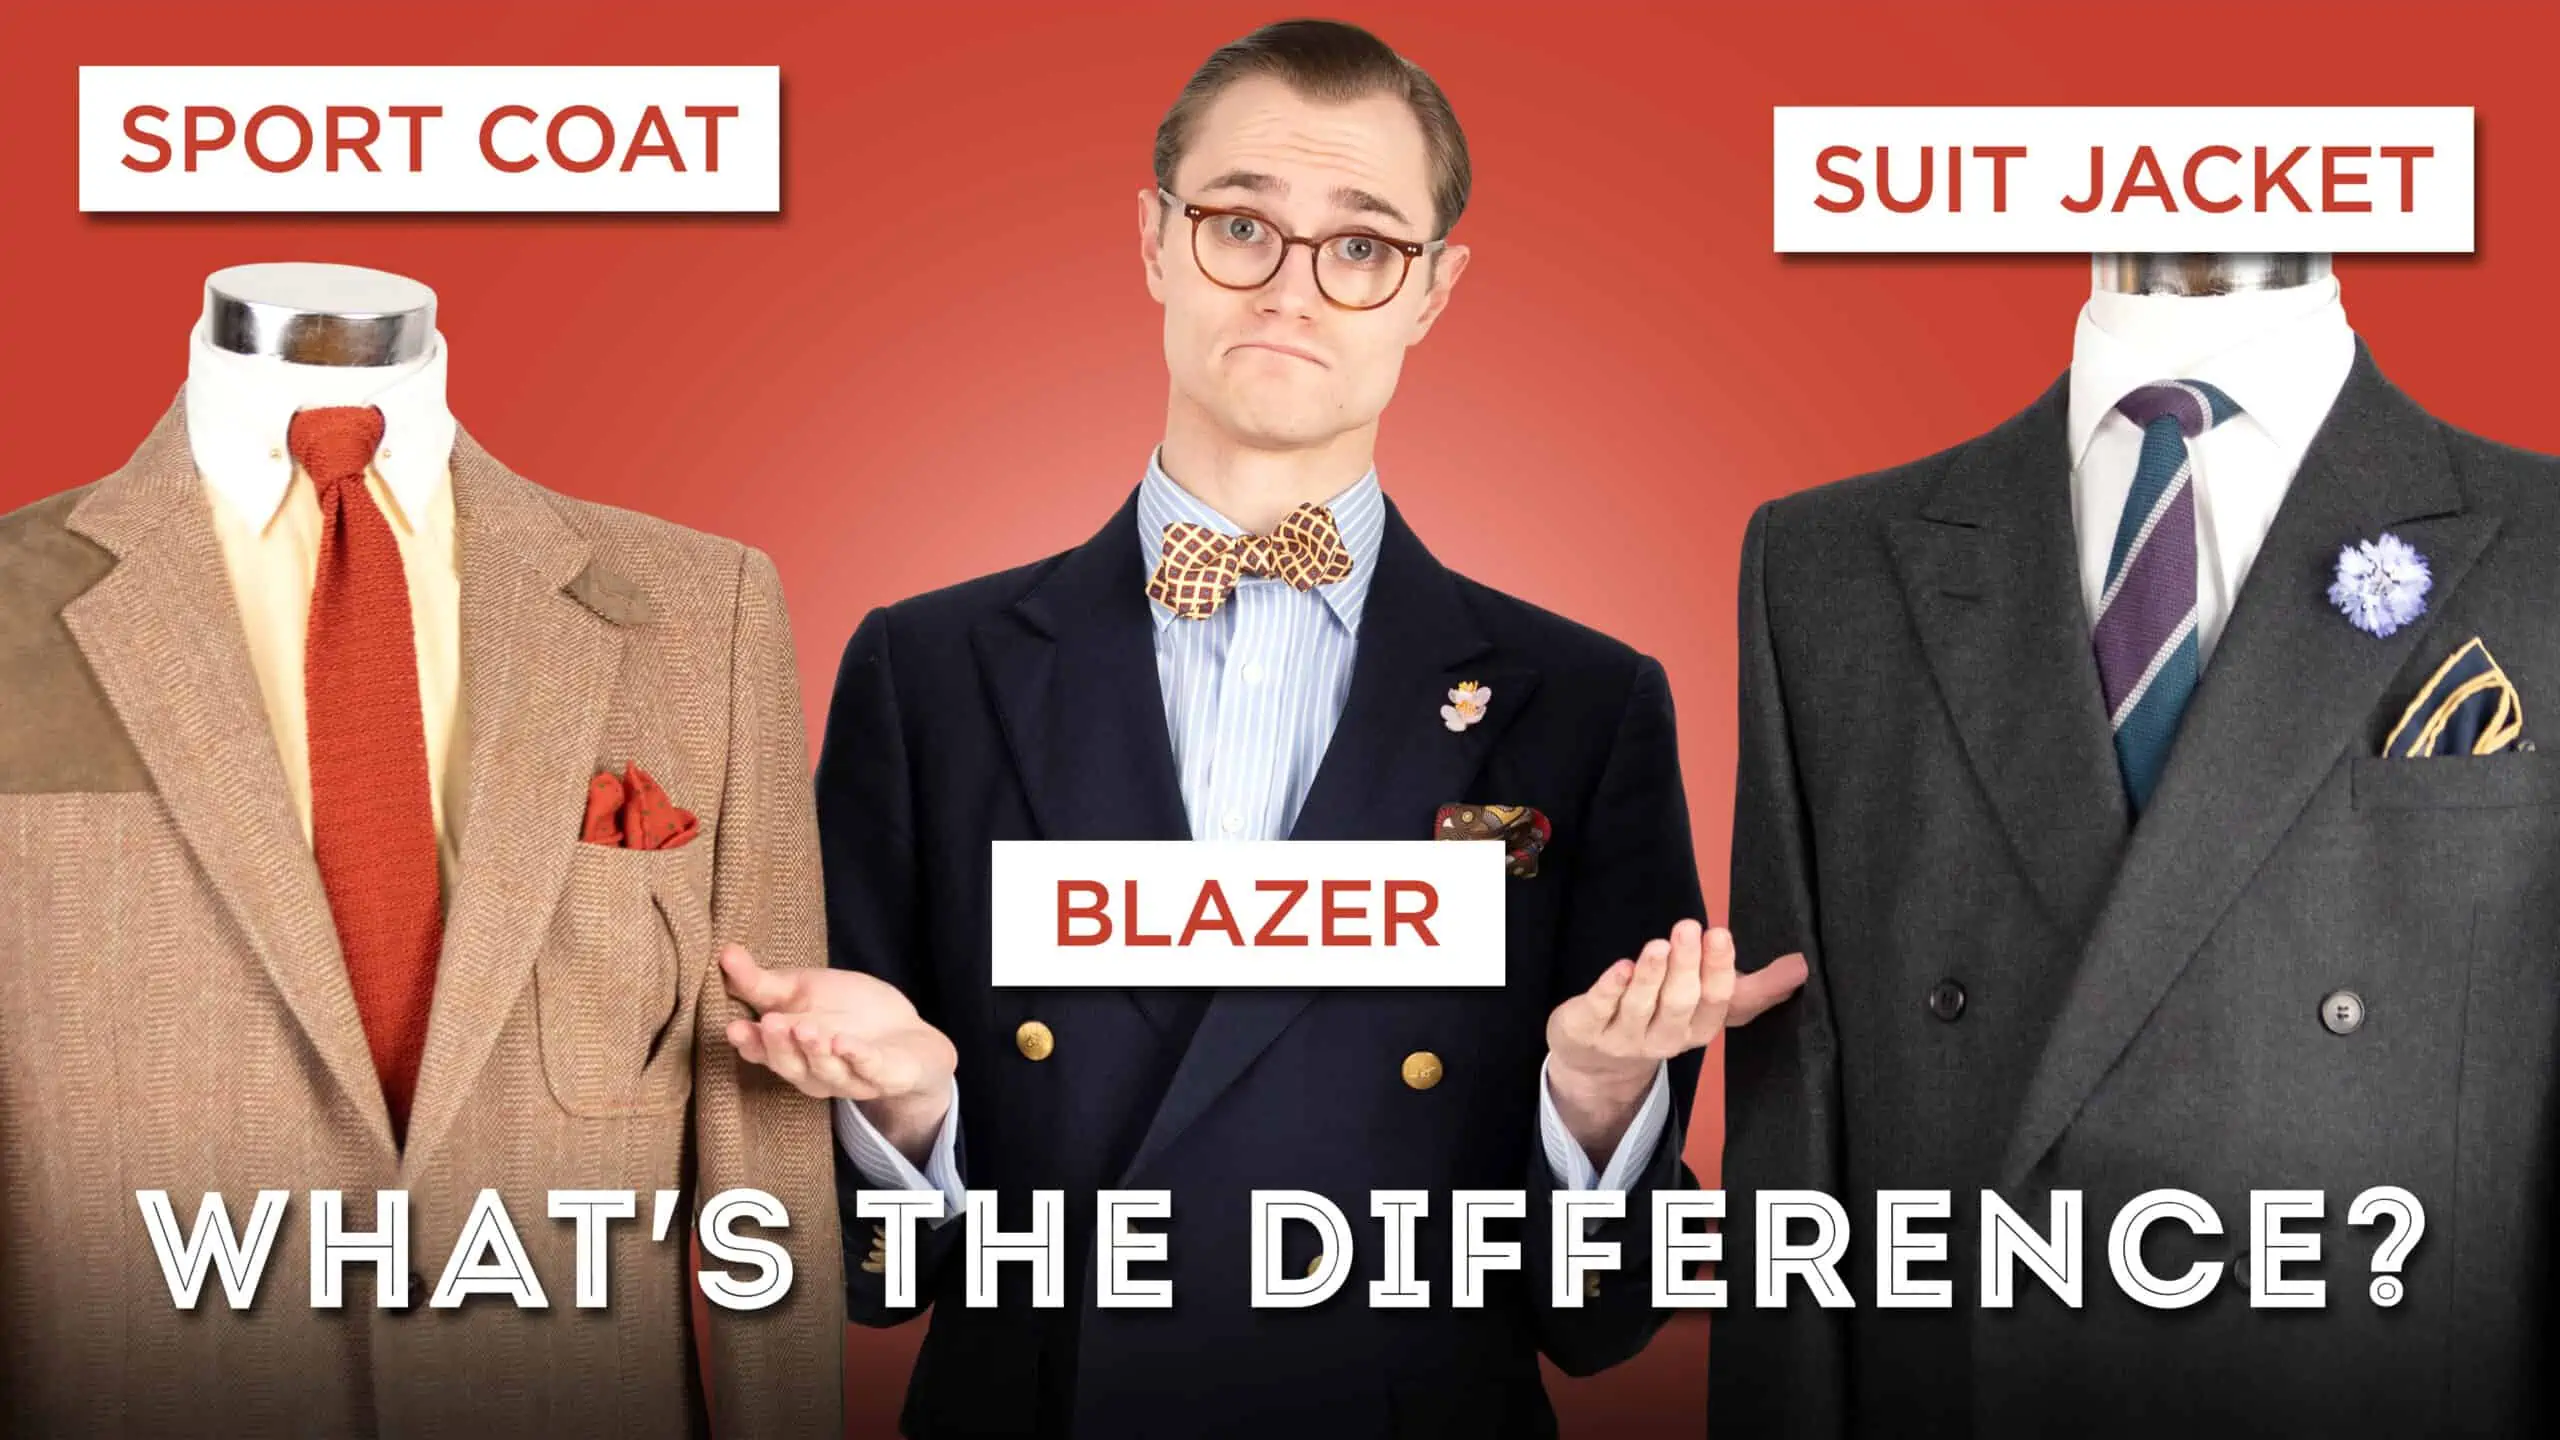 Suit Jackets, Sport Coats, Blazers: What's The Difference?